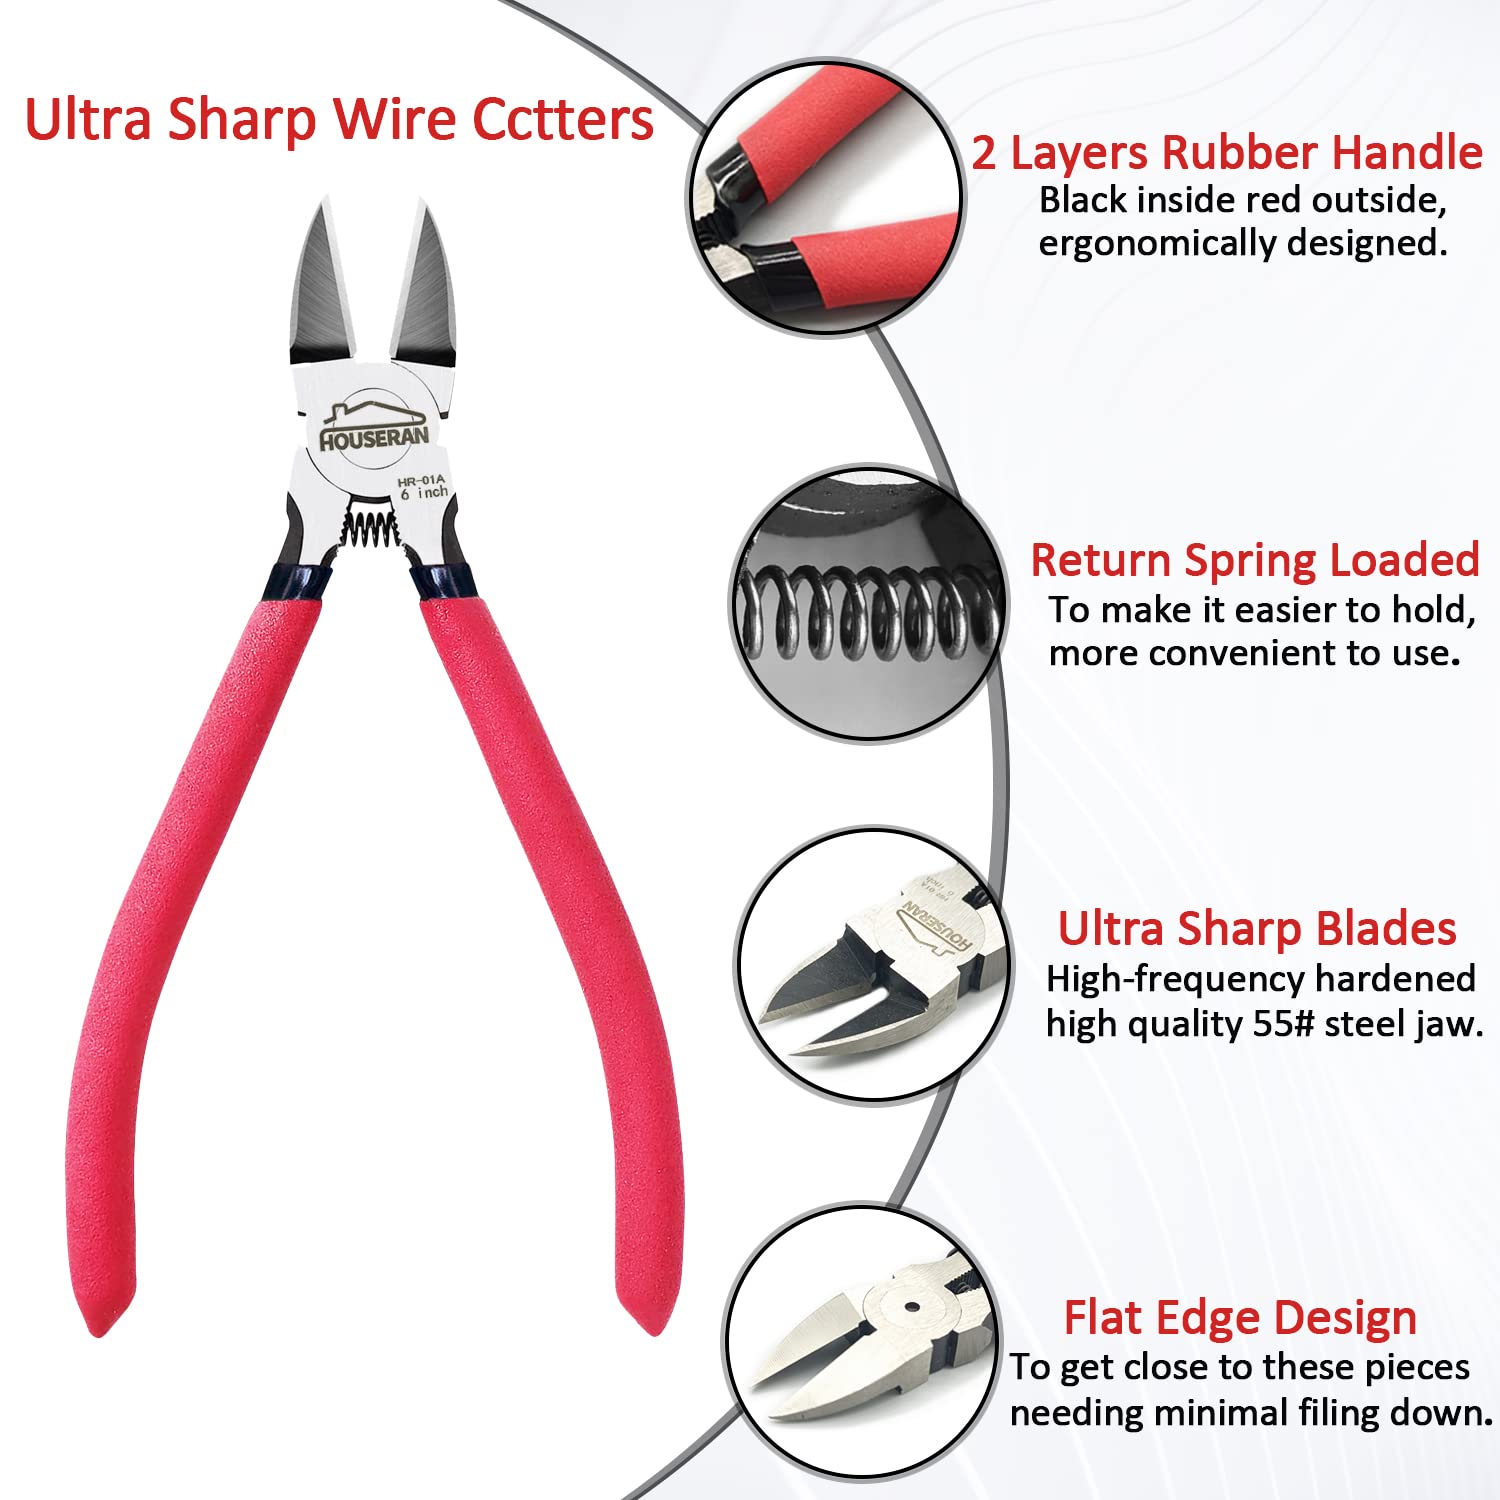 Wire Cutters 2 PACK, 6 inch Wire Cutters Set, HOUSERAN Side Cutters Flush Cut Pliers, Spring Loaded Cutting Pliers with Non-slip Red Handle, Wire Cutters Heavy Duty for Jewelry Making, Crafts, Zip Tie